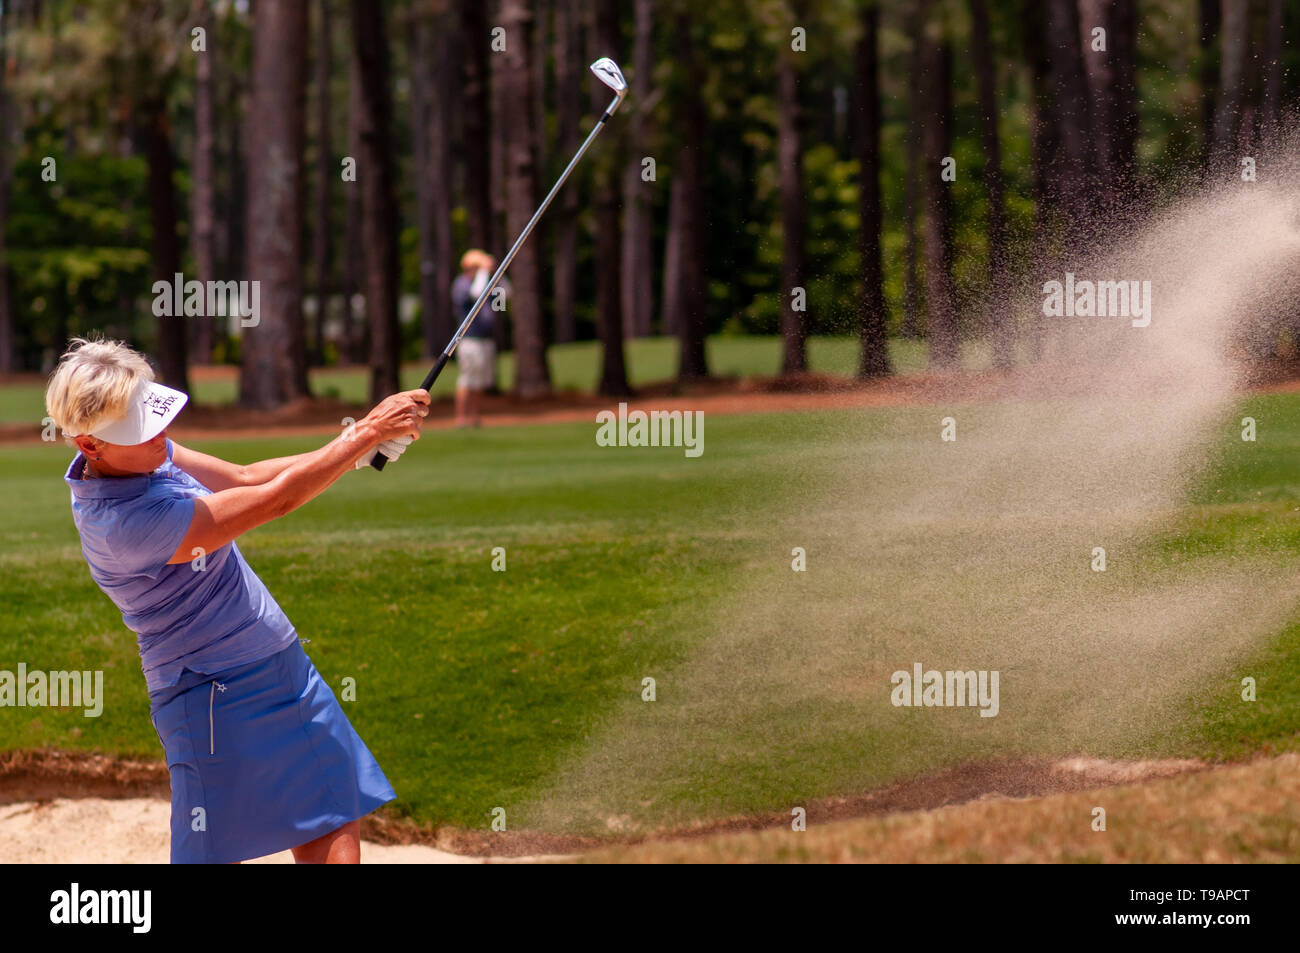 Southern Pines, North Carolina, USA. 17th May, 2019. May 17, 2019 - Southern Pines, North Carolina, US - TRISH JOHNSON of England plays a shot from a bunker on the first hole during the second round of the USGA's 2nd U.S. Senior Women's Open Championship at Pine Needles Lodge & Golf Club, May 17, 2019 in Southern Pines, North Carolina. Johnson has 27 career victories on the Ladies European Tour, the LPGA, and Legends Tour. This is the sixth USGA Championship at Pine Needles dating back to 1989. Credit: Timothy L. Hale/ZUMA Wire/Alamy Live News Stock Photo